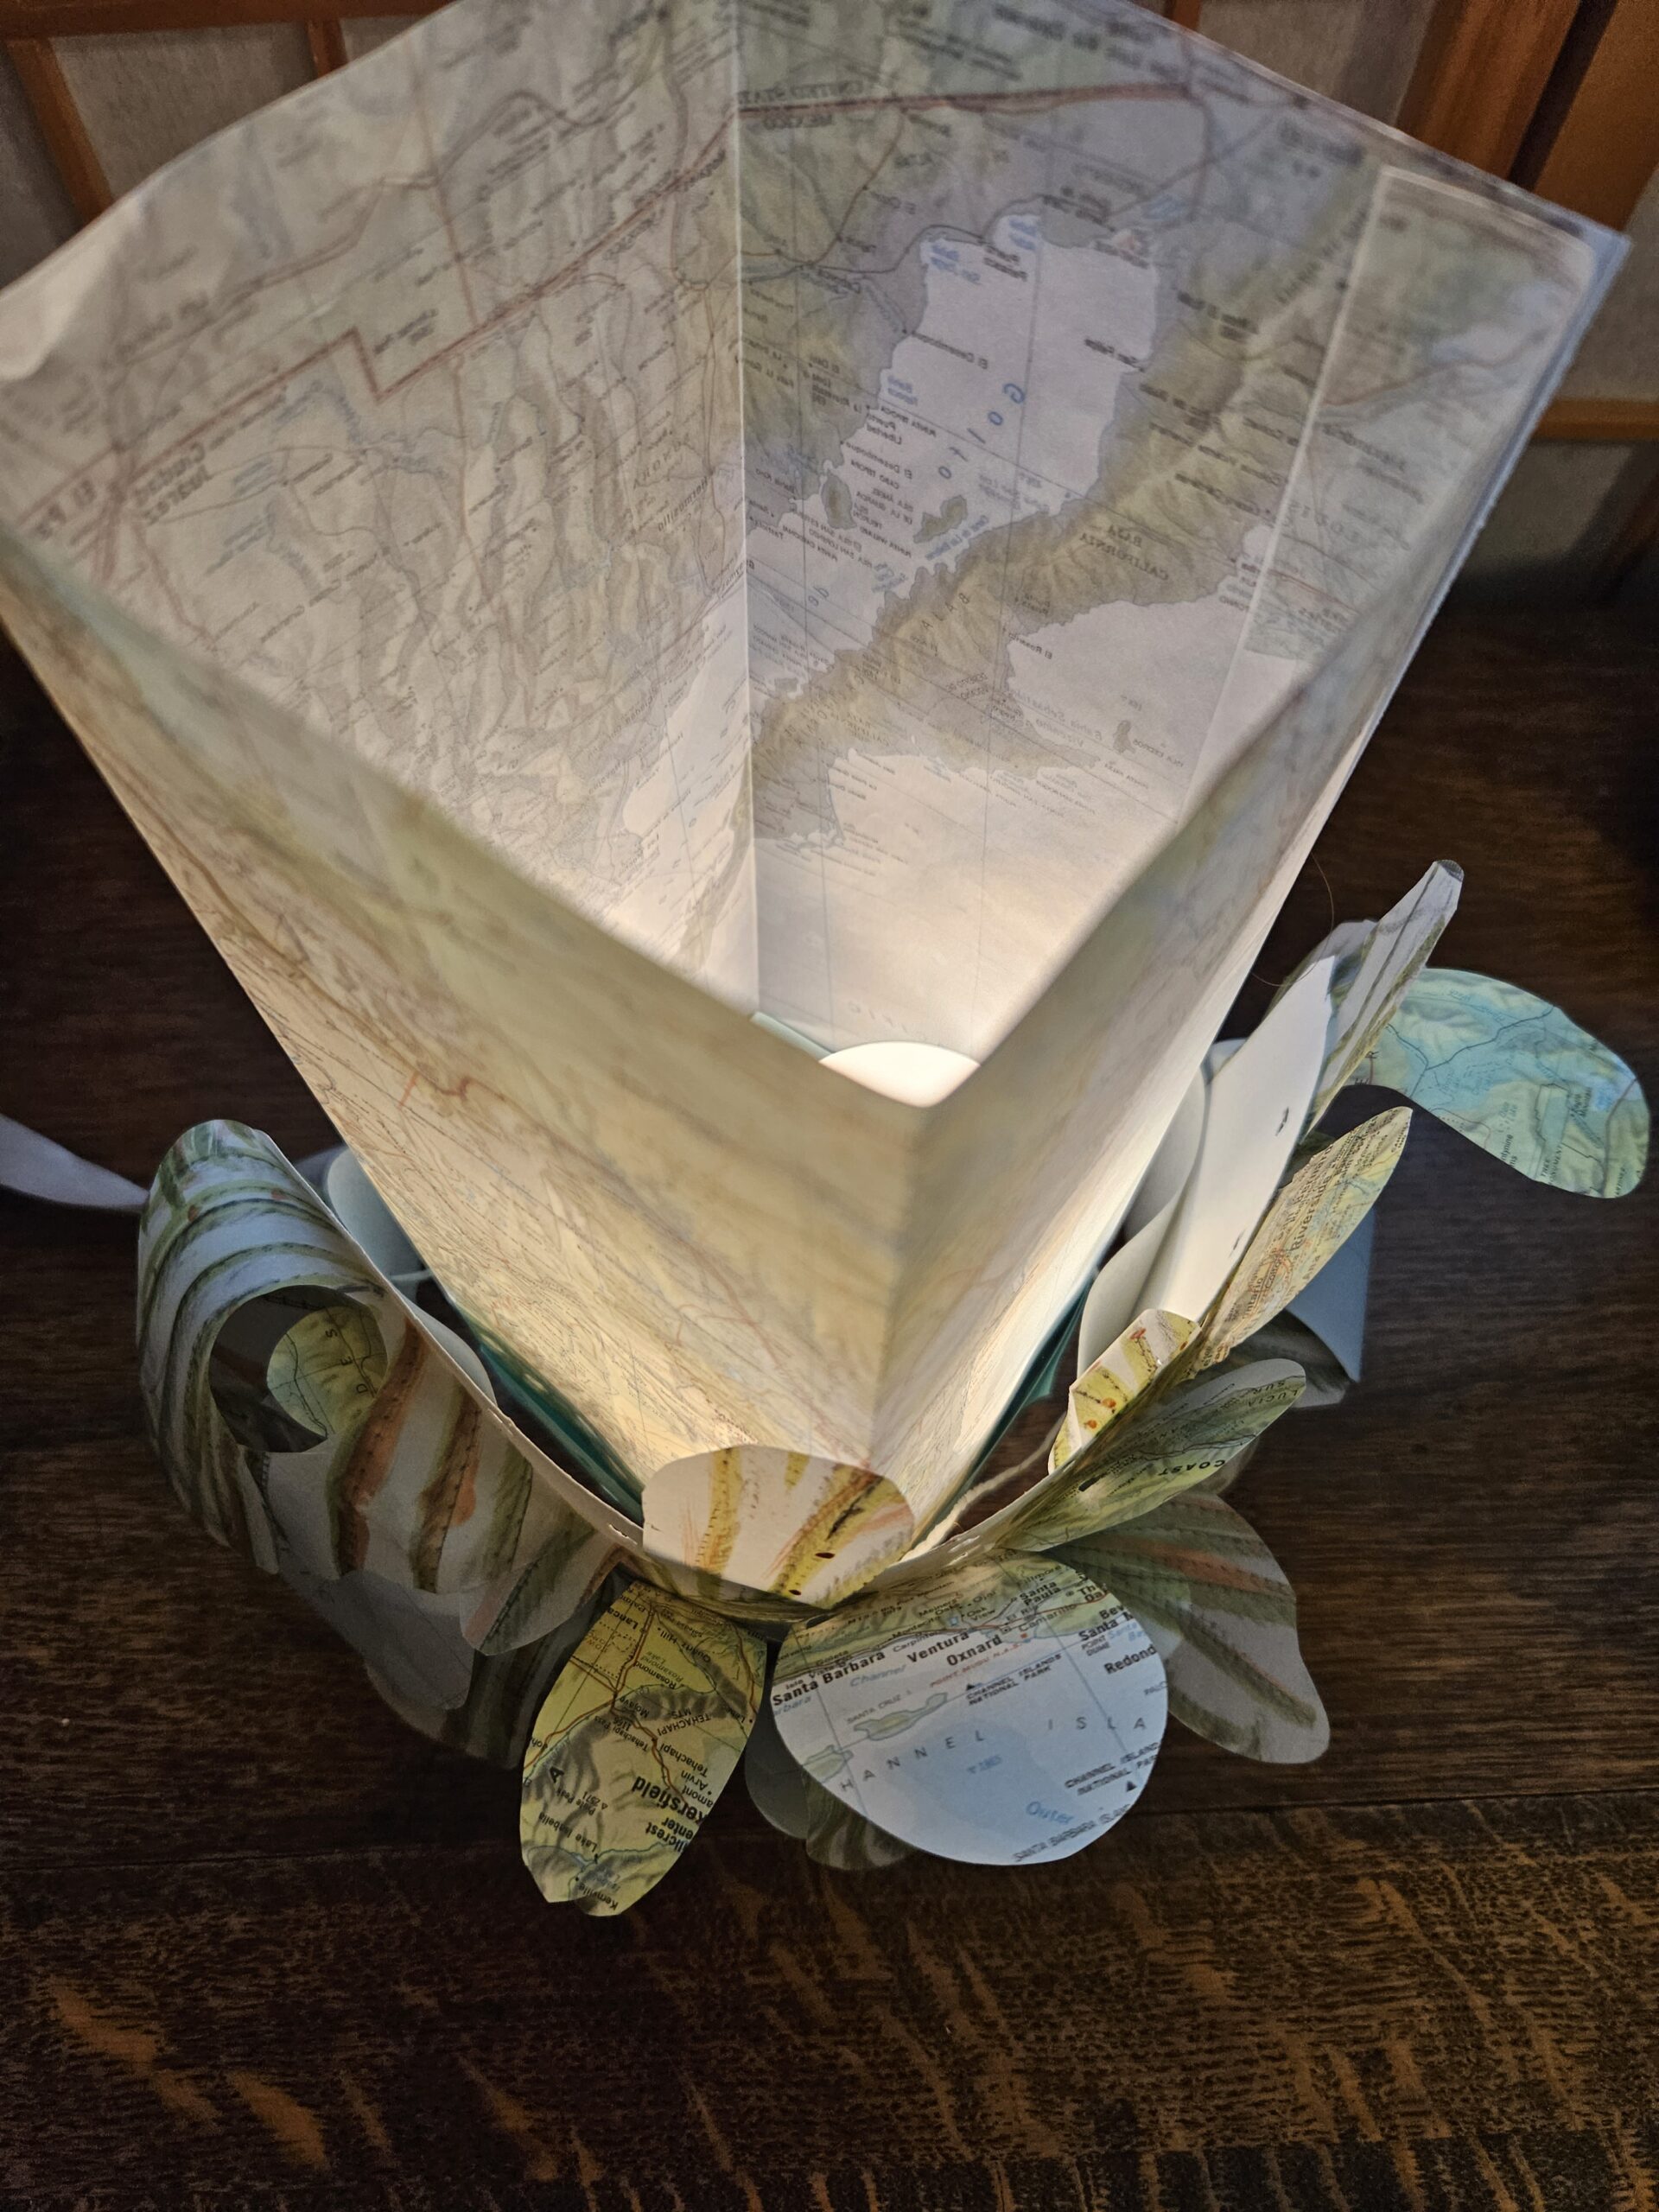 a paper lantern using maps, various papers and botanic rubbings with watercolour and ink